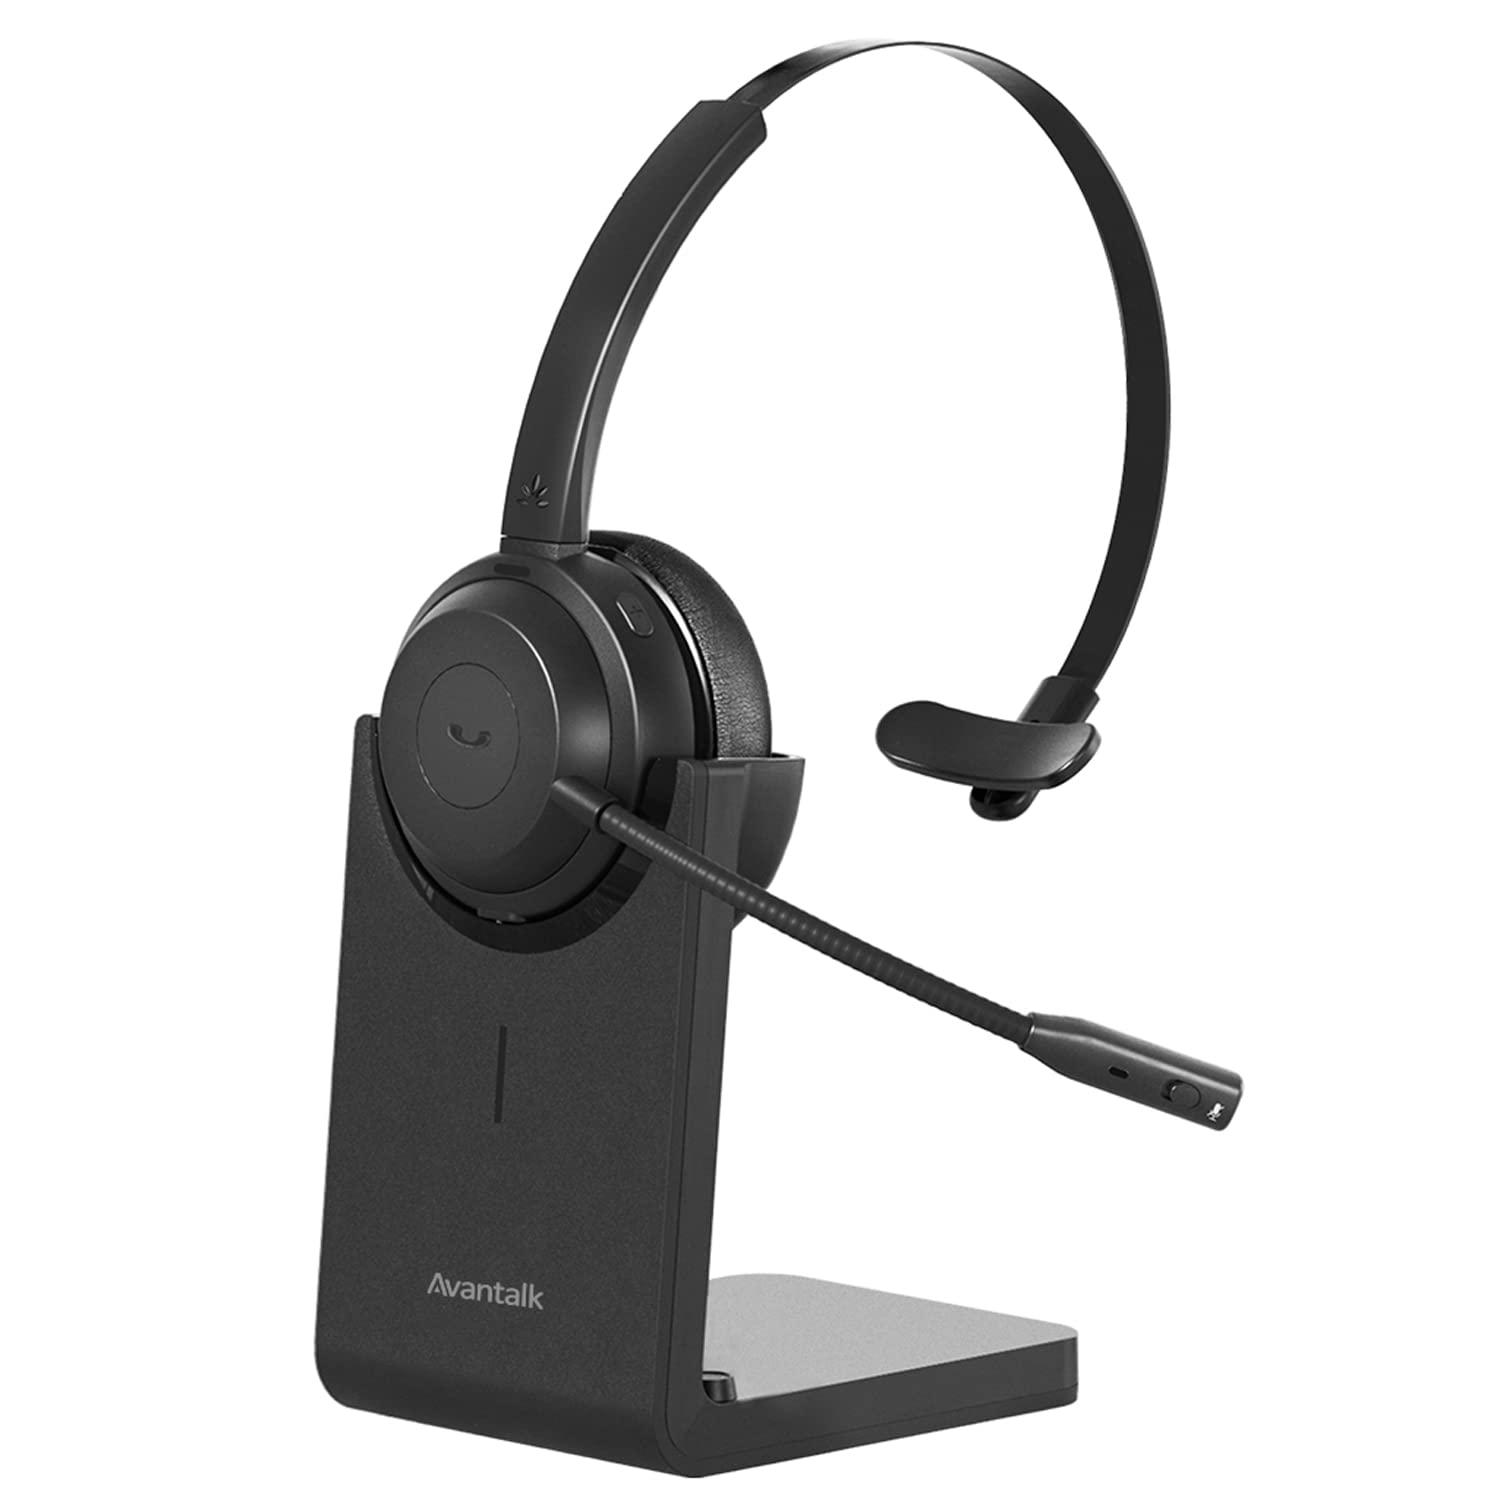 Avantalk Alto Solo - Qualcomm Bluetooth 5.1 Wireless Headset with CVC Noise-Canceling Microphone for PC, Computer, Laptop, Phone & Truckers with Mute Switch, Charging Dock, and Wired Headphones Mode